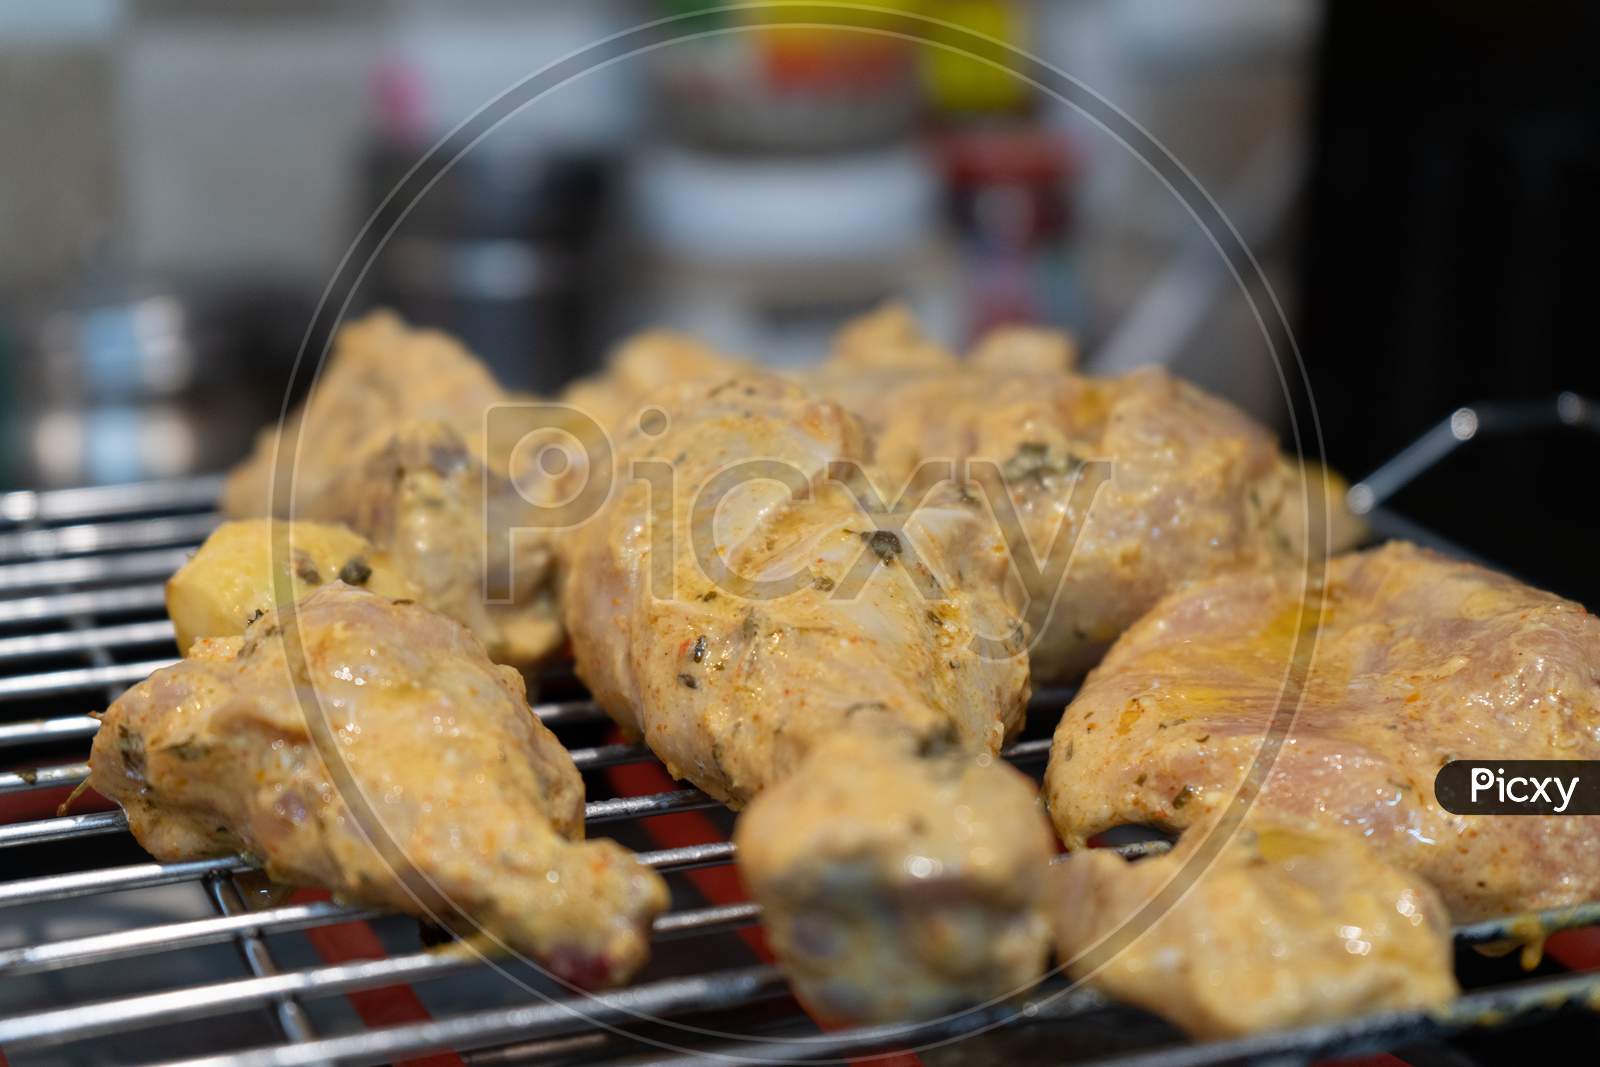 Chicken Marinated With Oil And Spices Cooking On A Hot Electric Grill Making Paneer Tikka Masala In An Indian Home